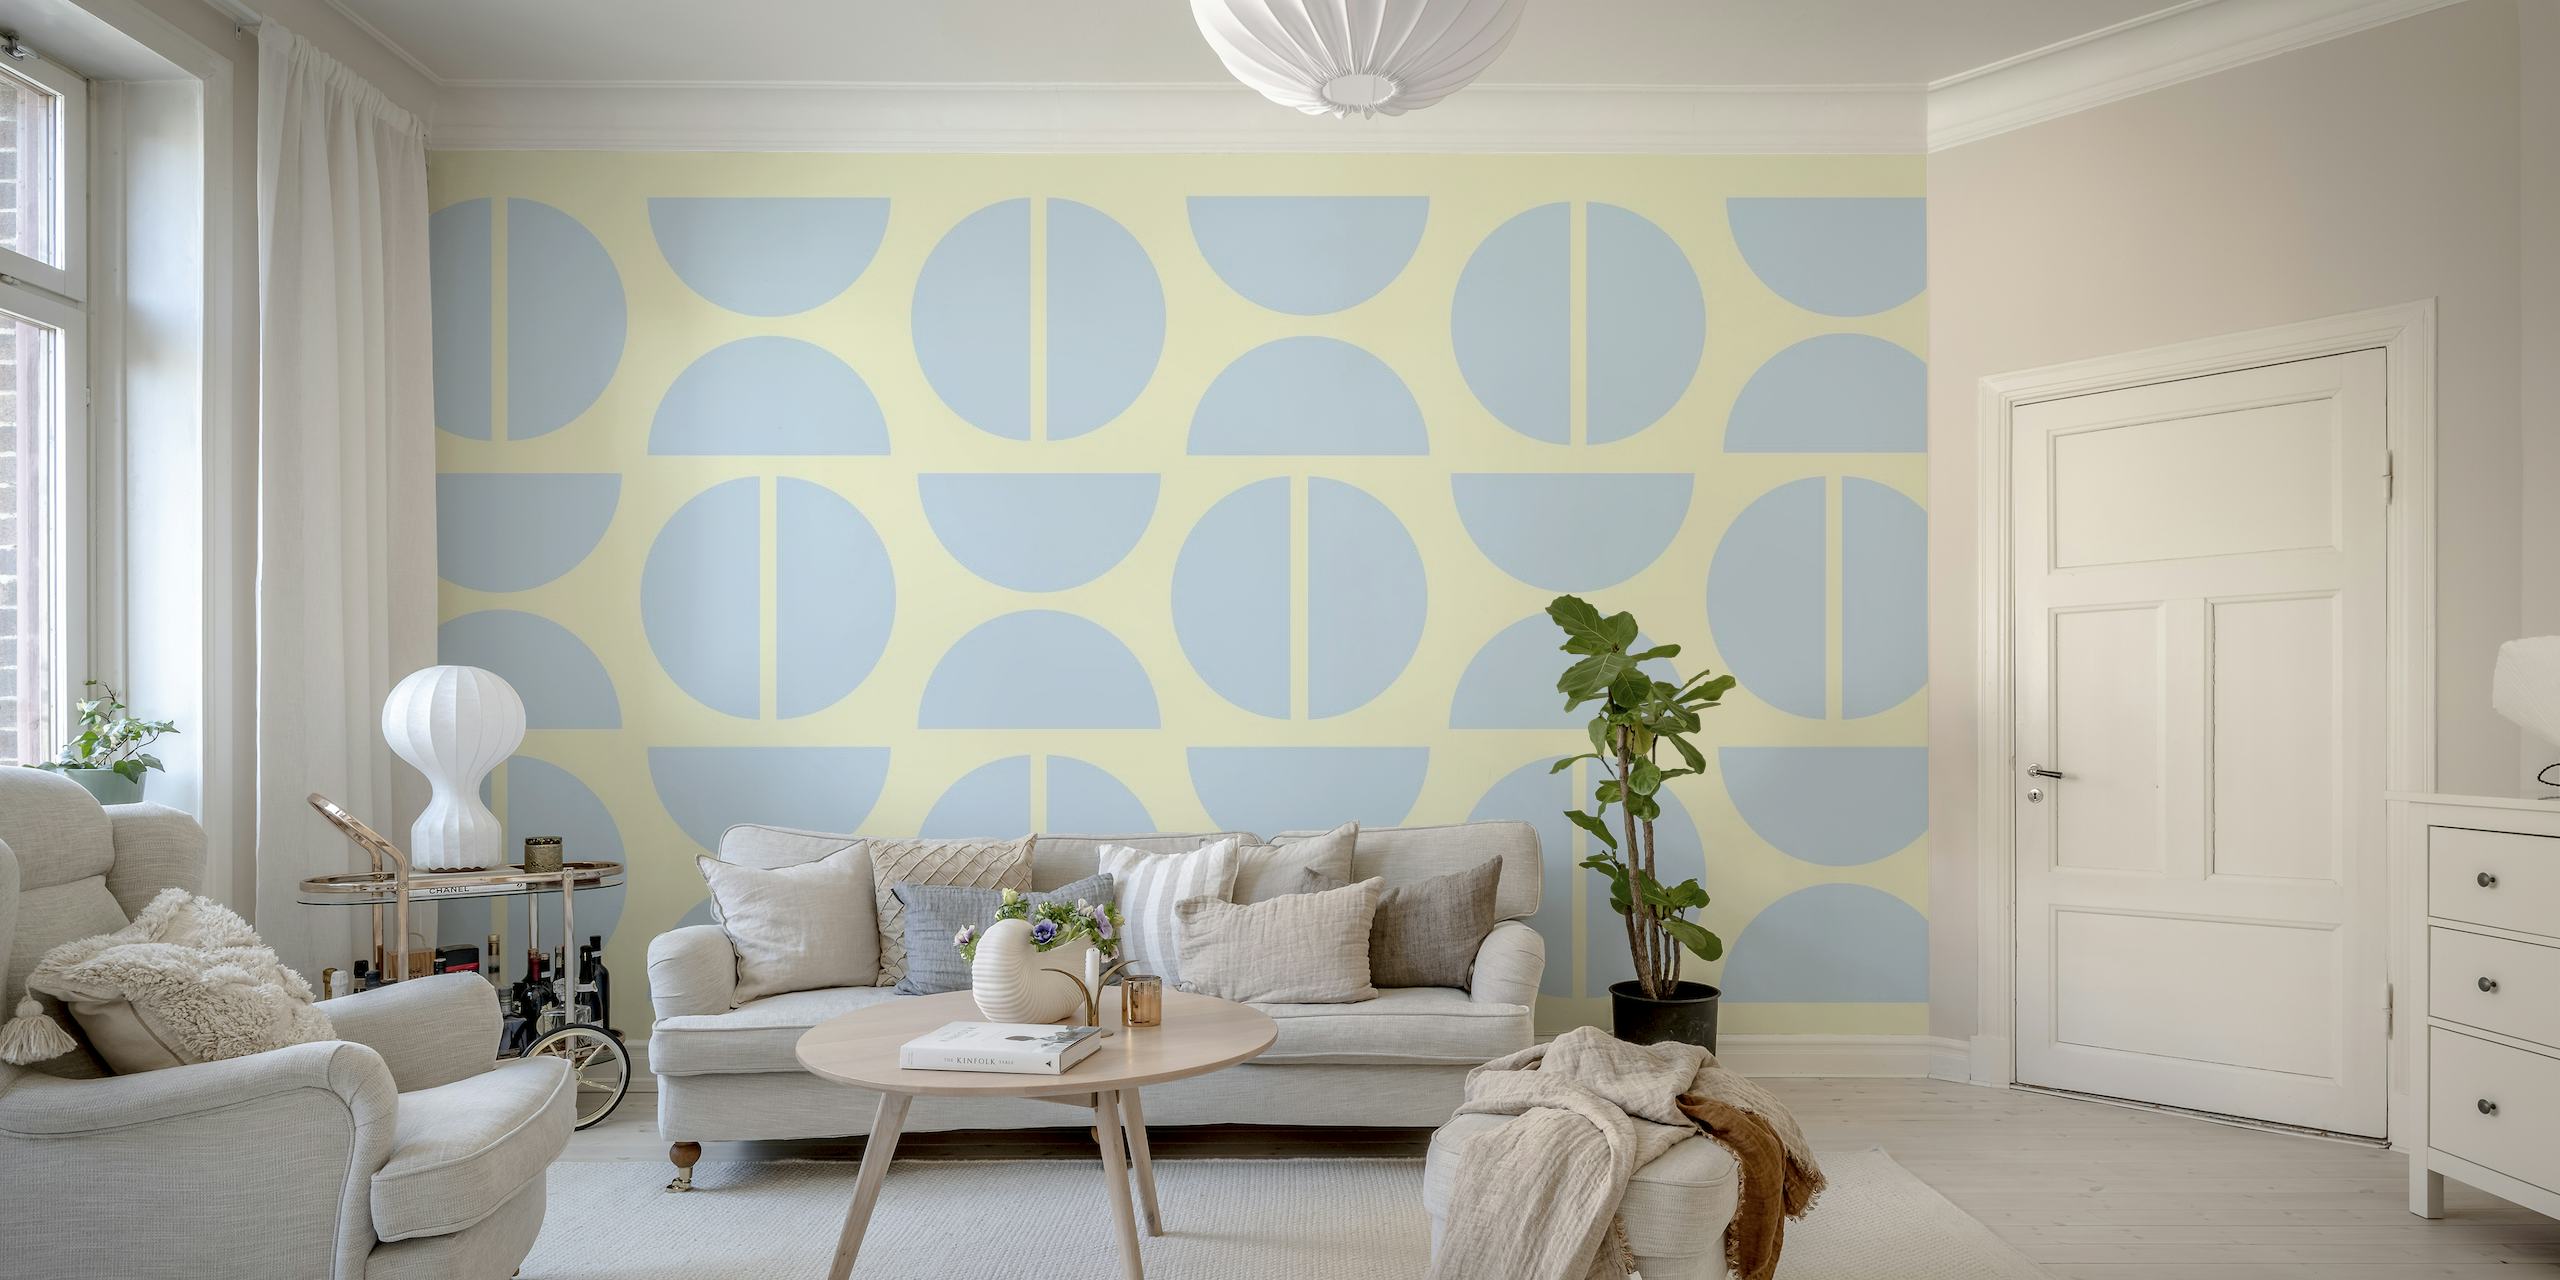 Geometric patterned wall mural in baby blue and cream inspired by Bauhaus design